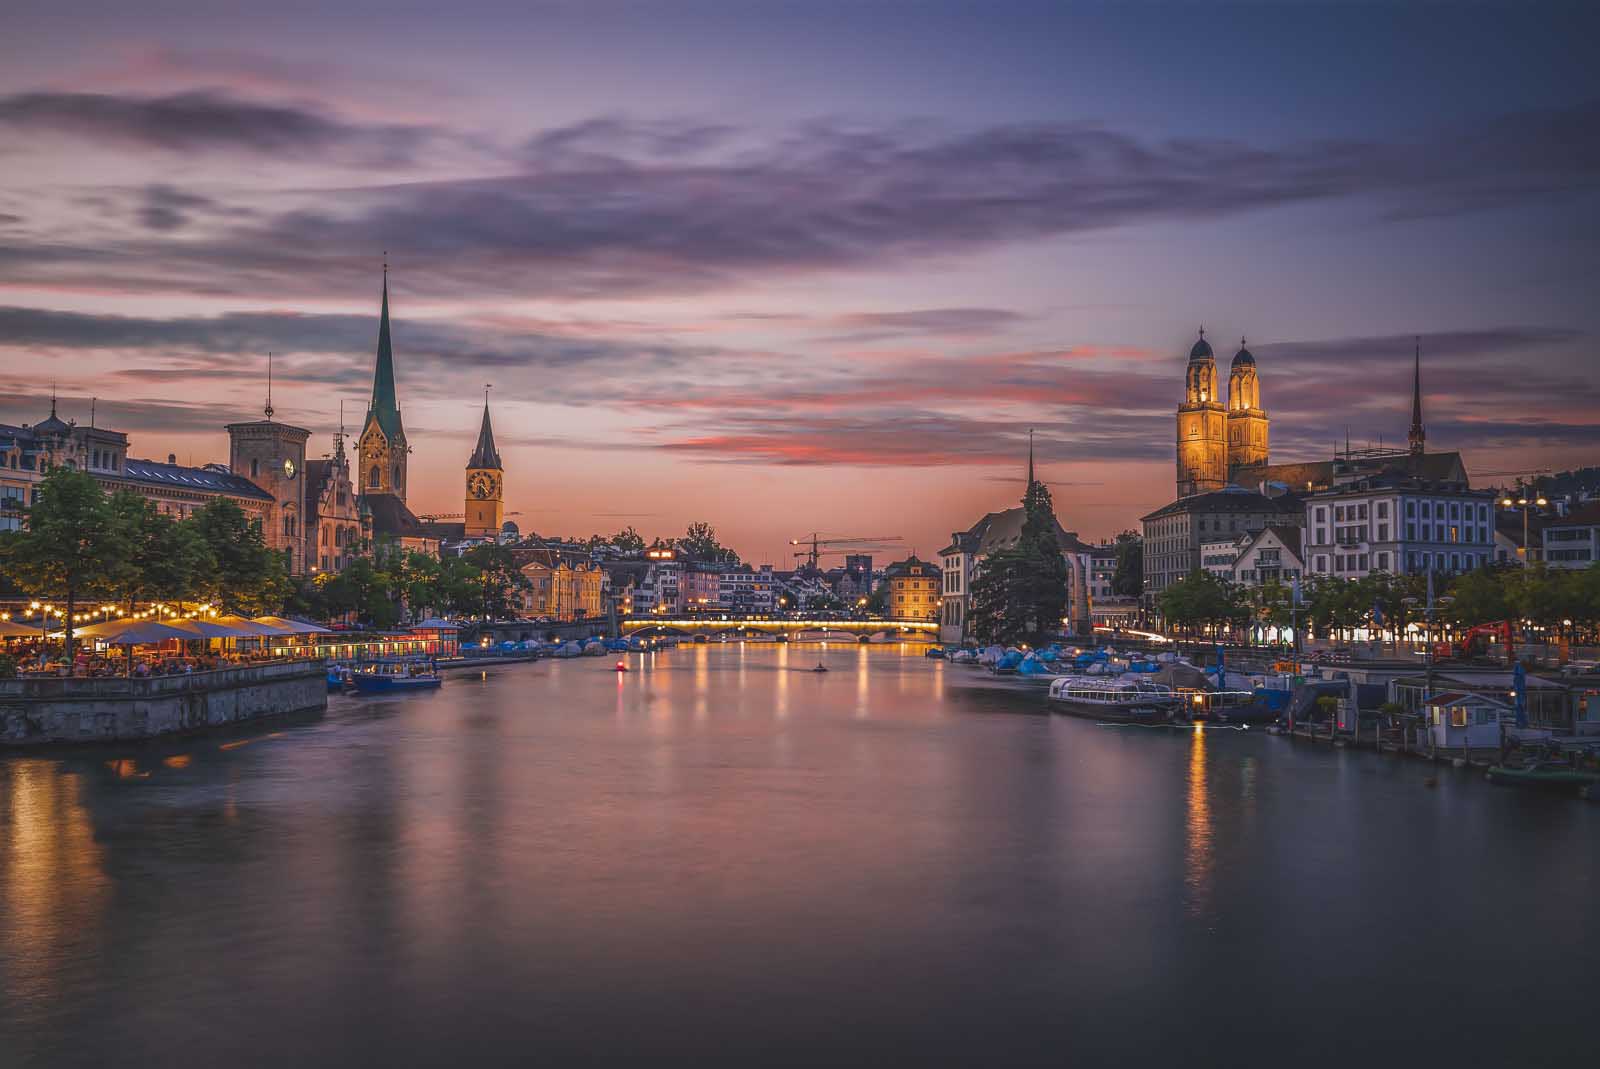 15 Beautiful Cities in Switzerland from our First-Hand Visits